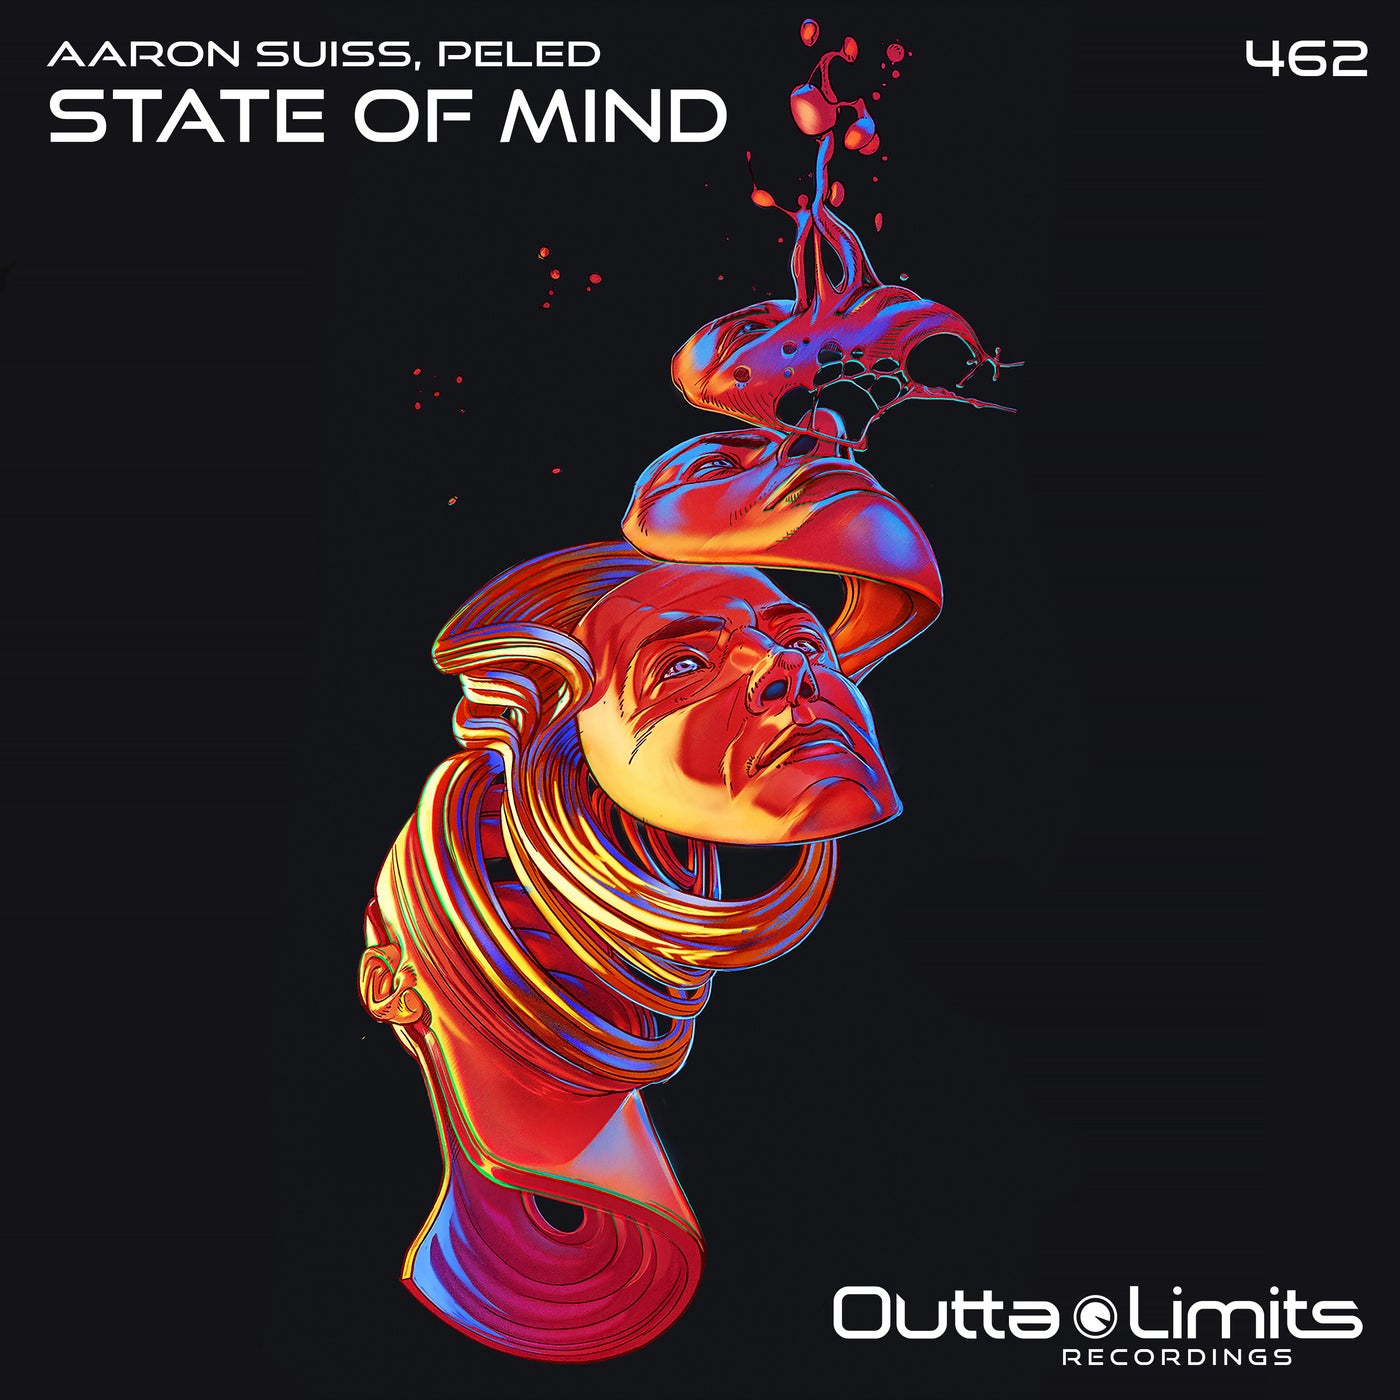 Aaron Suiss, Peled - State Of Mind (Original Mix)